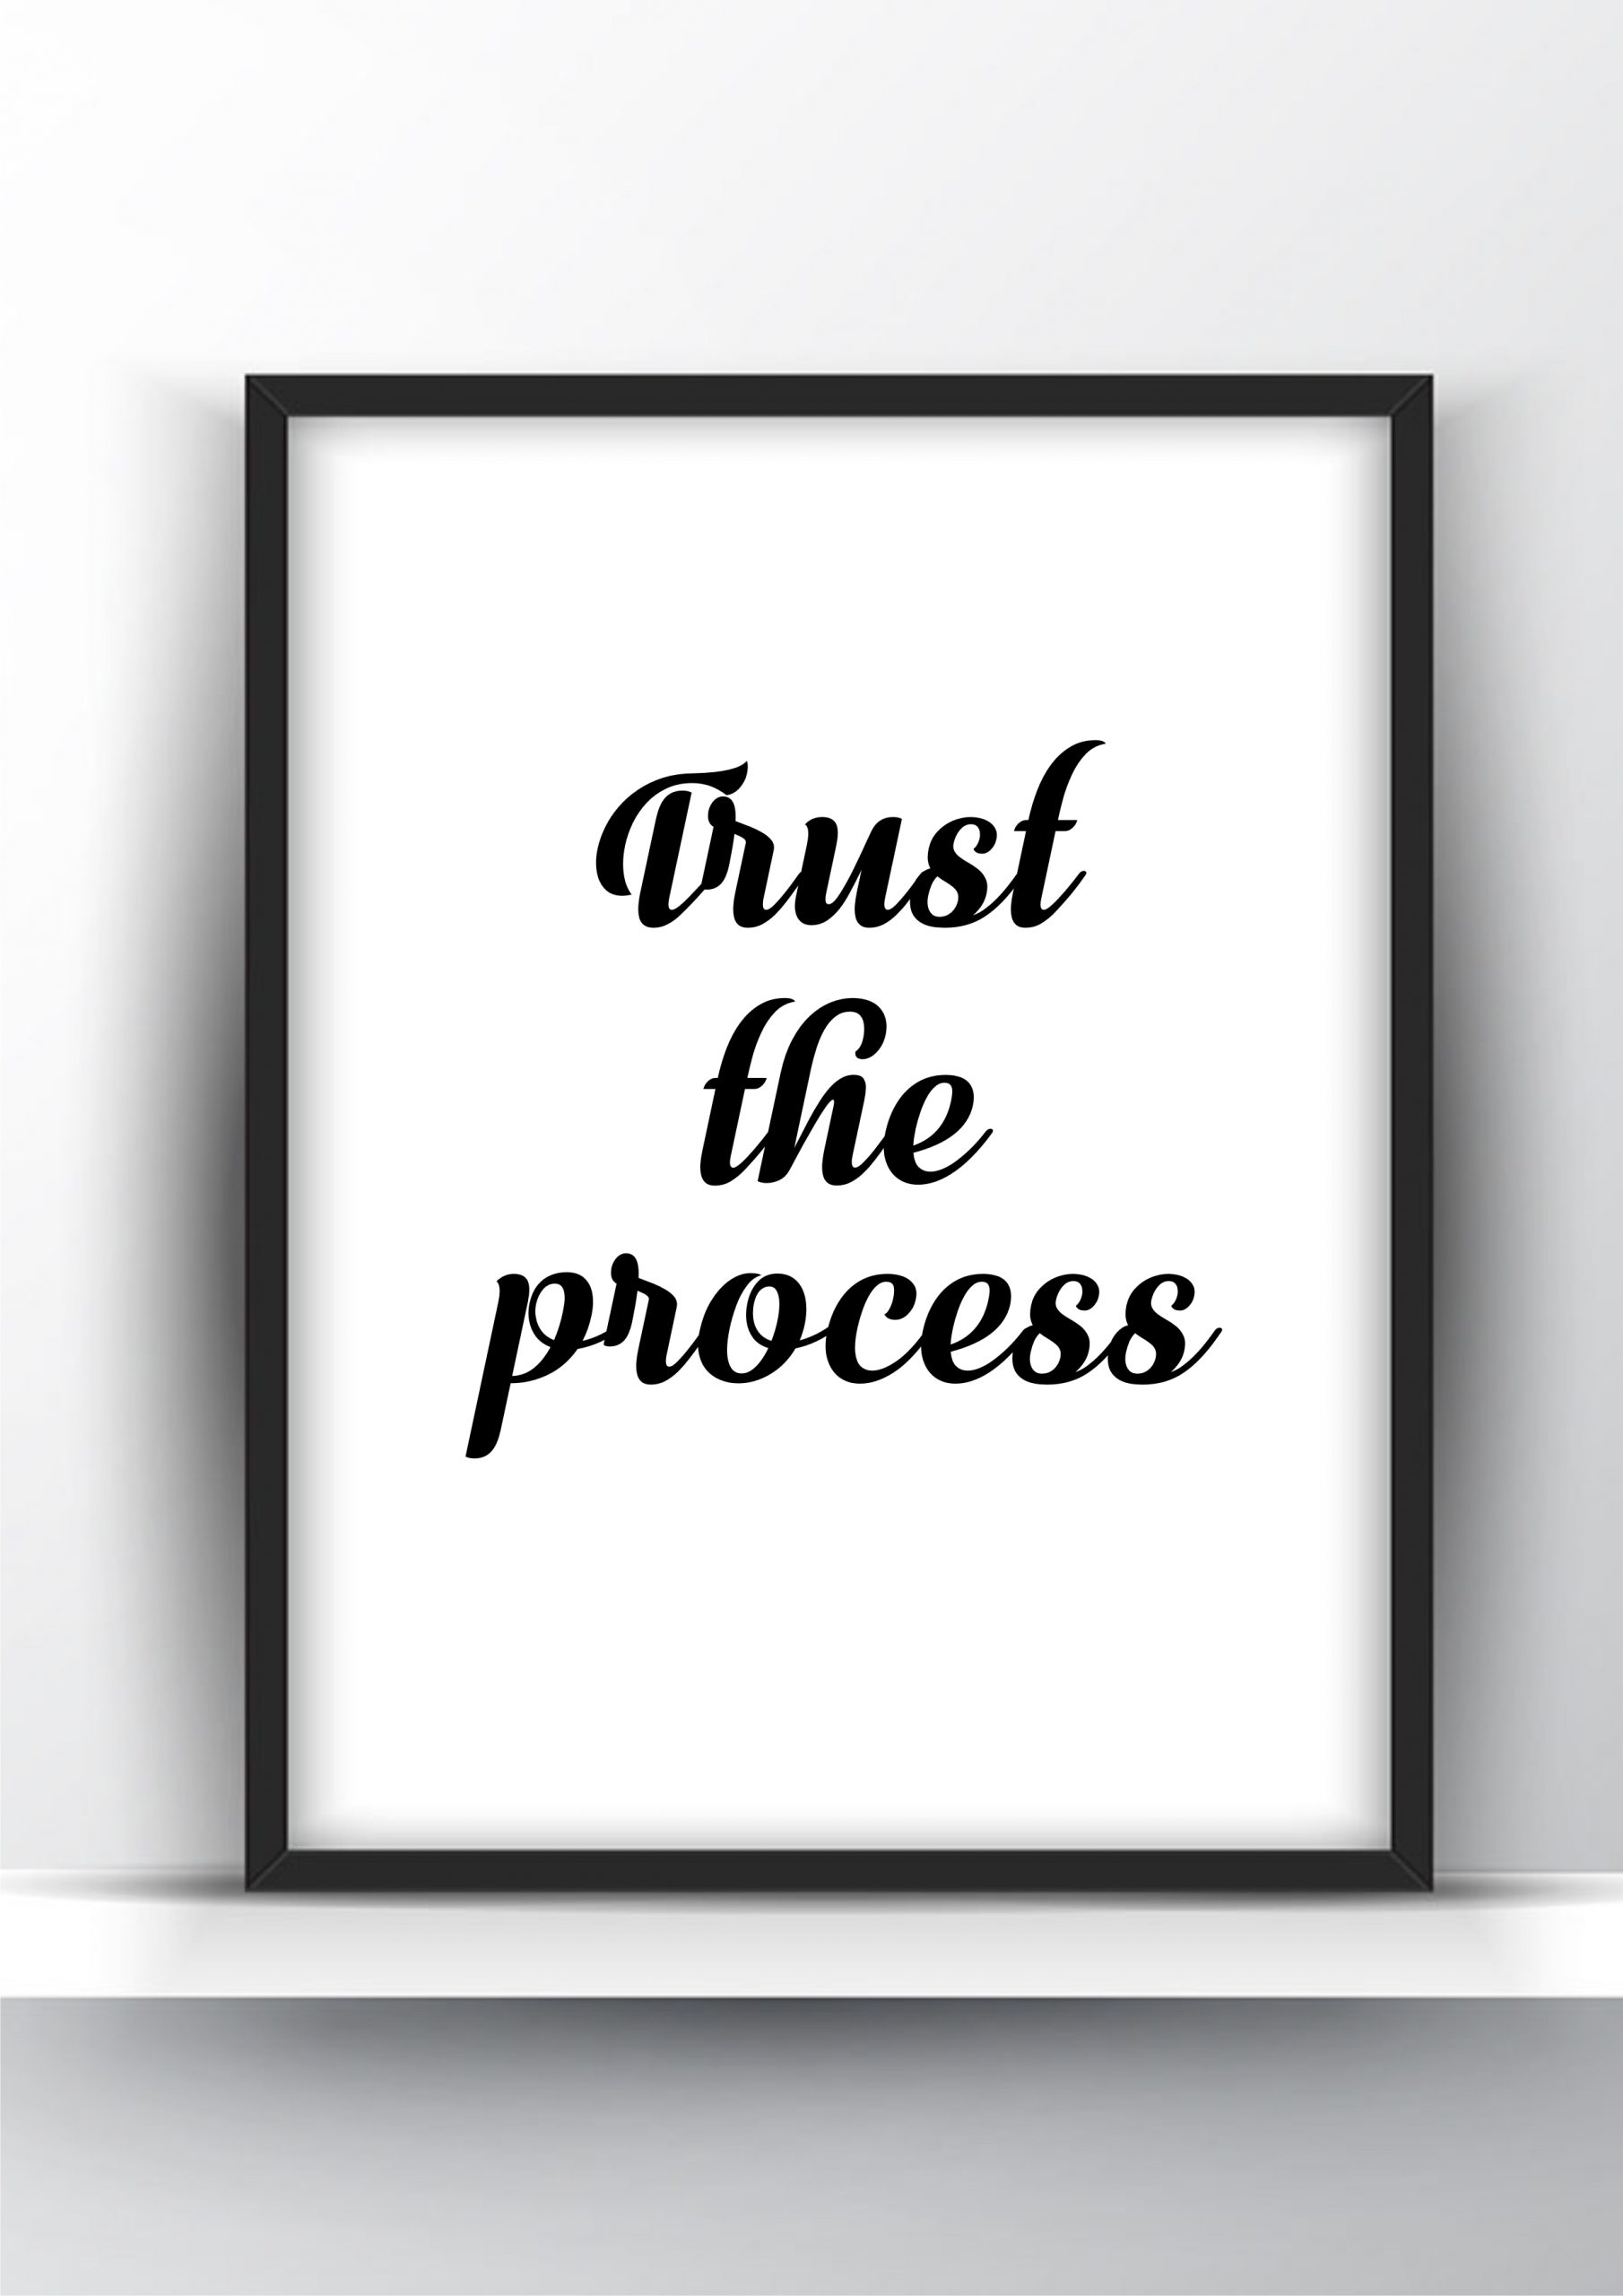 Trust The Process: What is the Process?